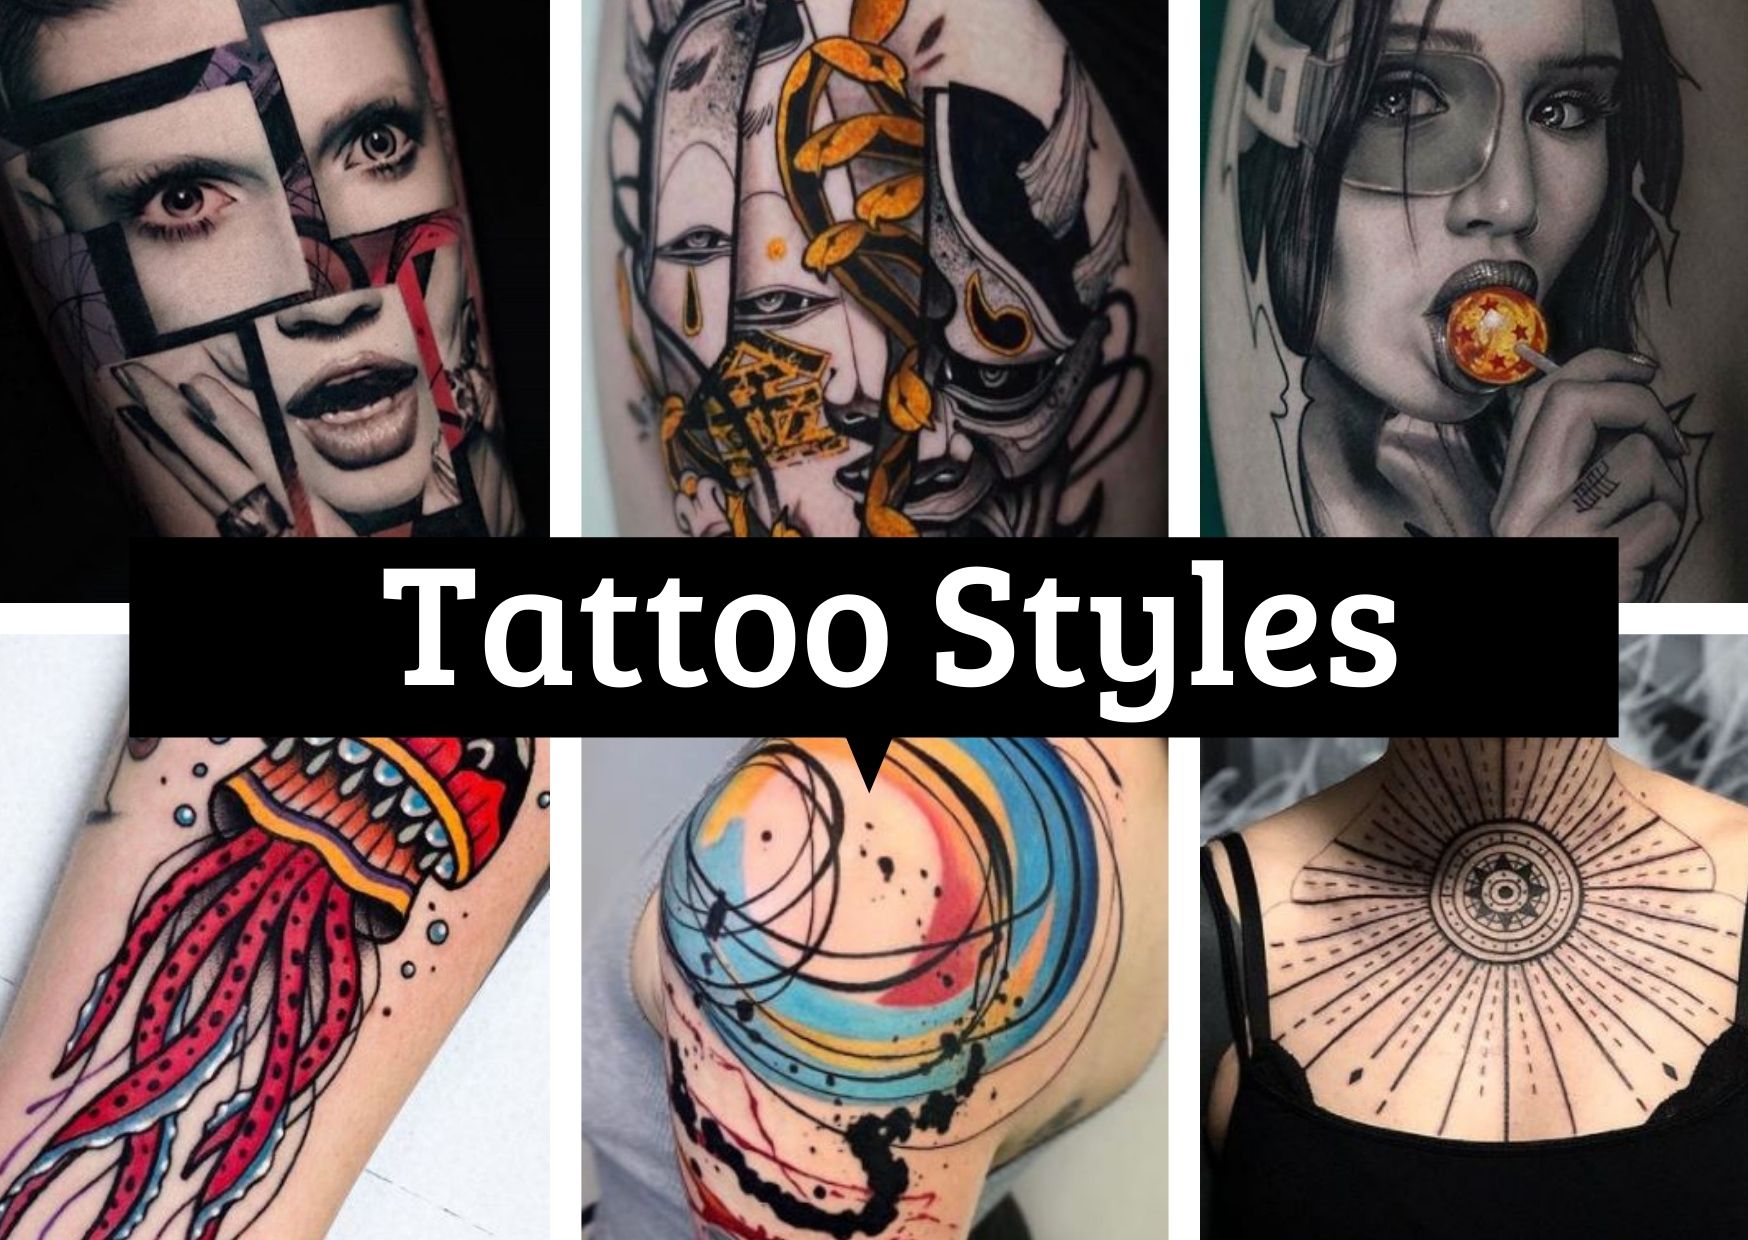 What is the most popular tattoo style right now?